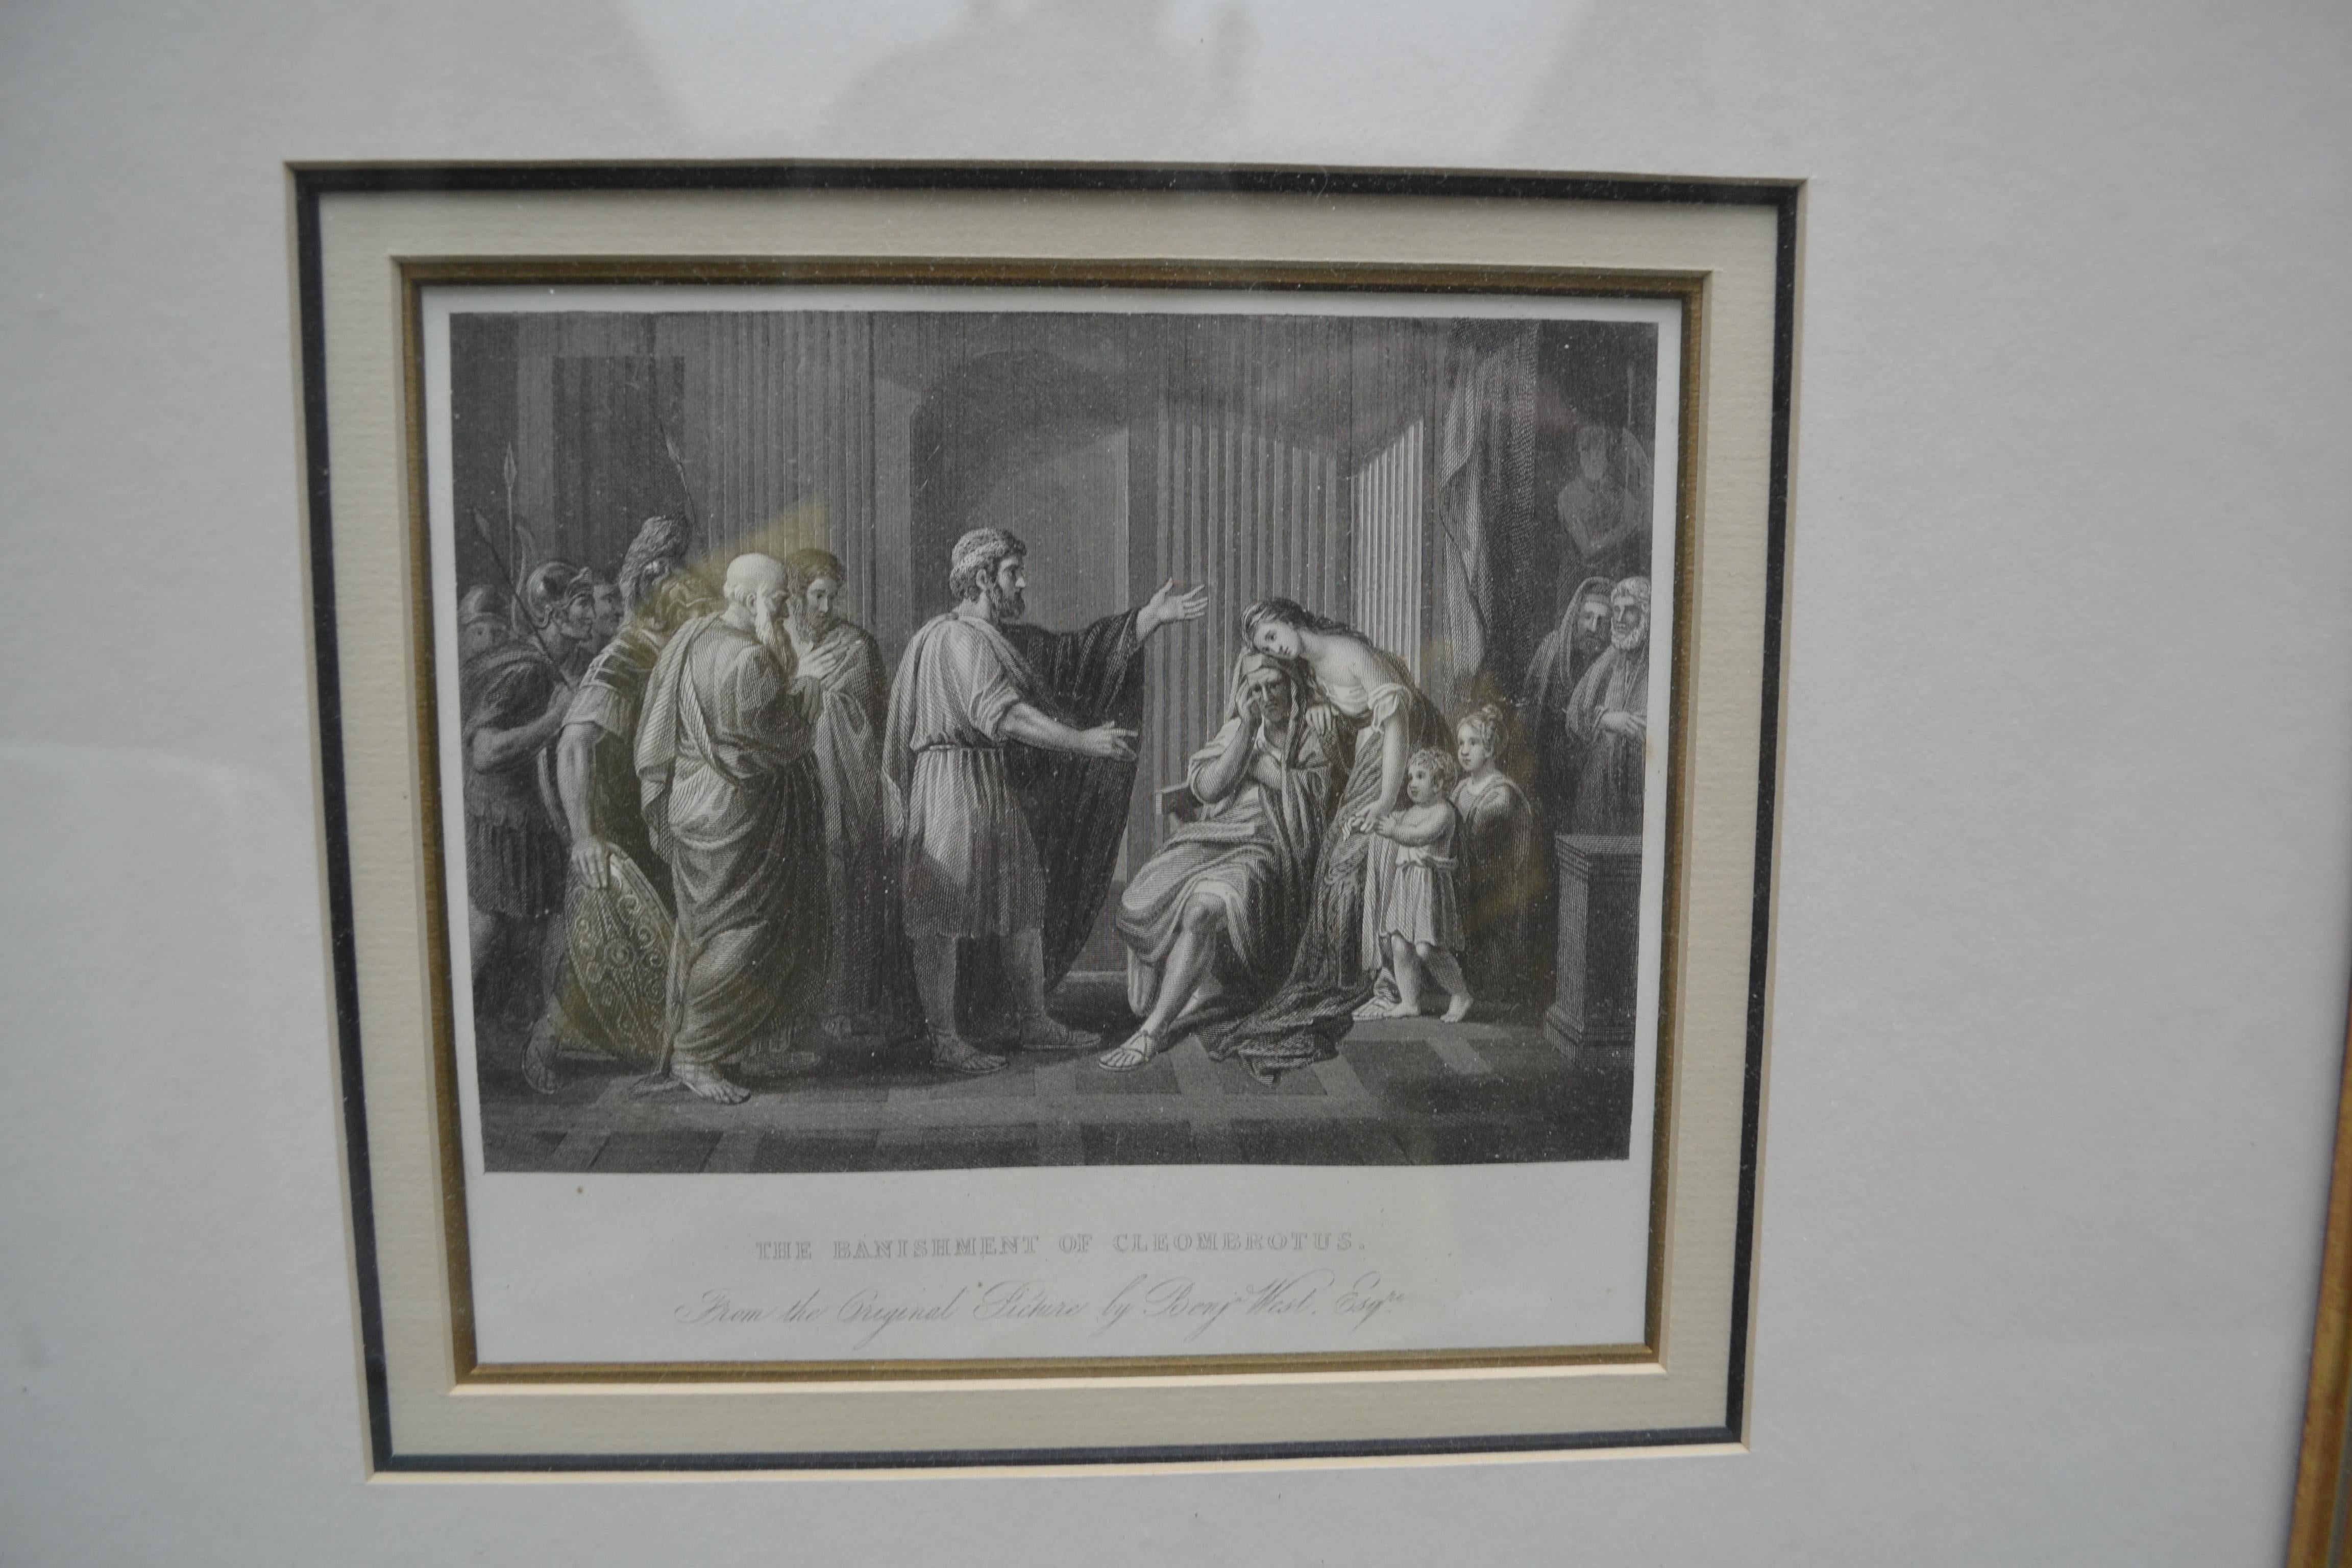 A 19th century steel plate engraving depicting the Banishment of Cleombrotus after the original by Benjamin West oil on canvas painting executed in 1768 and held at the Tate Gallery. The engraving is presented with beige matting and a gilded wooden